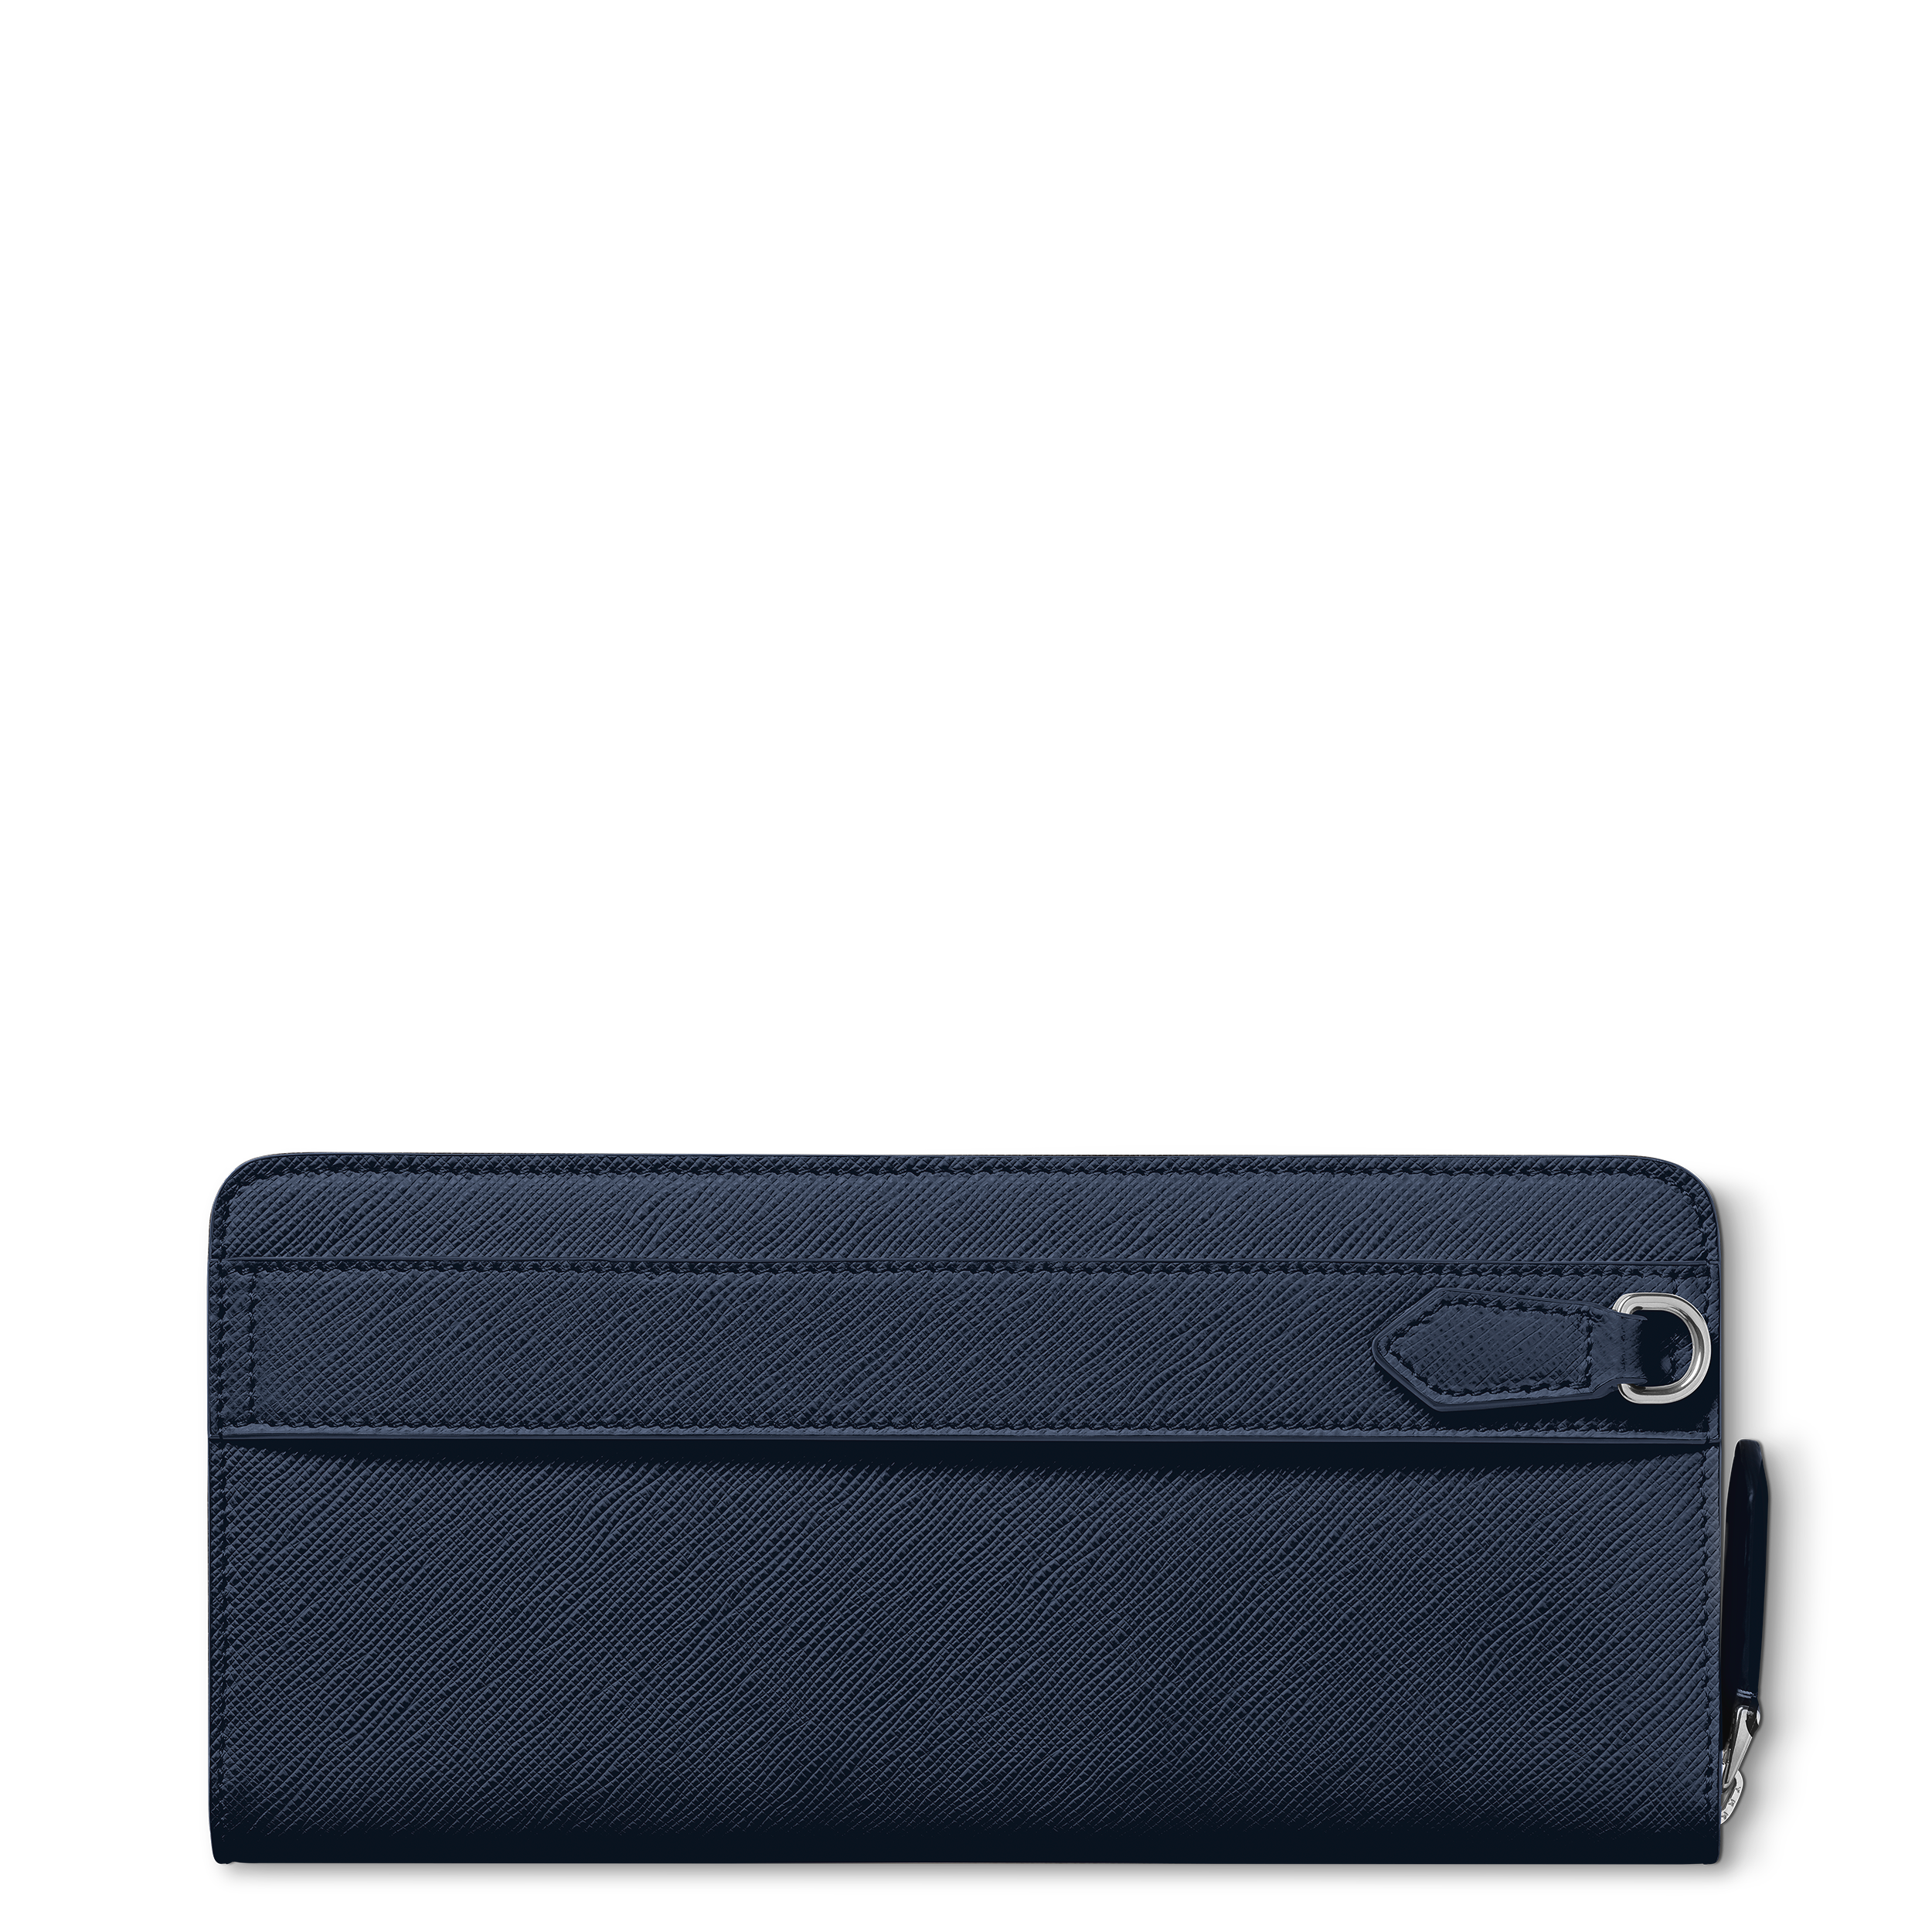 Montblanc Sartorial phone pouch, image 3